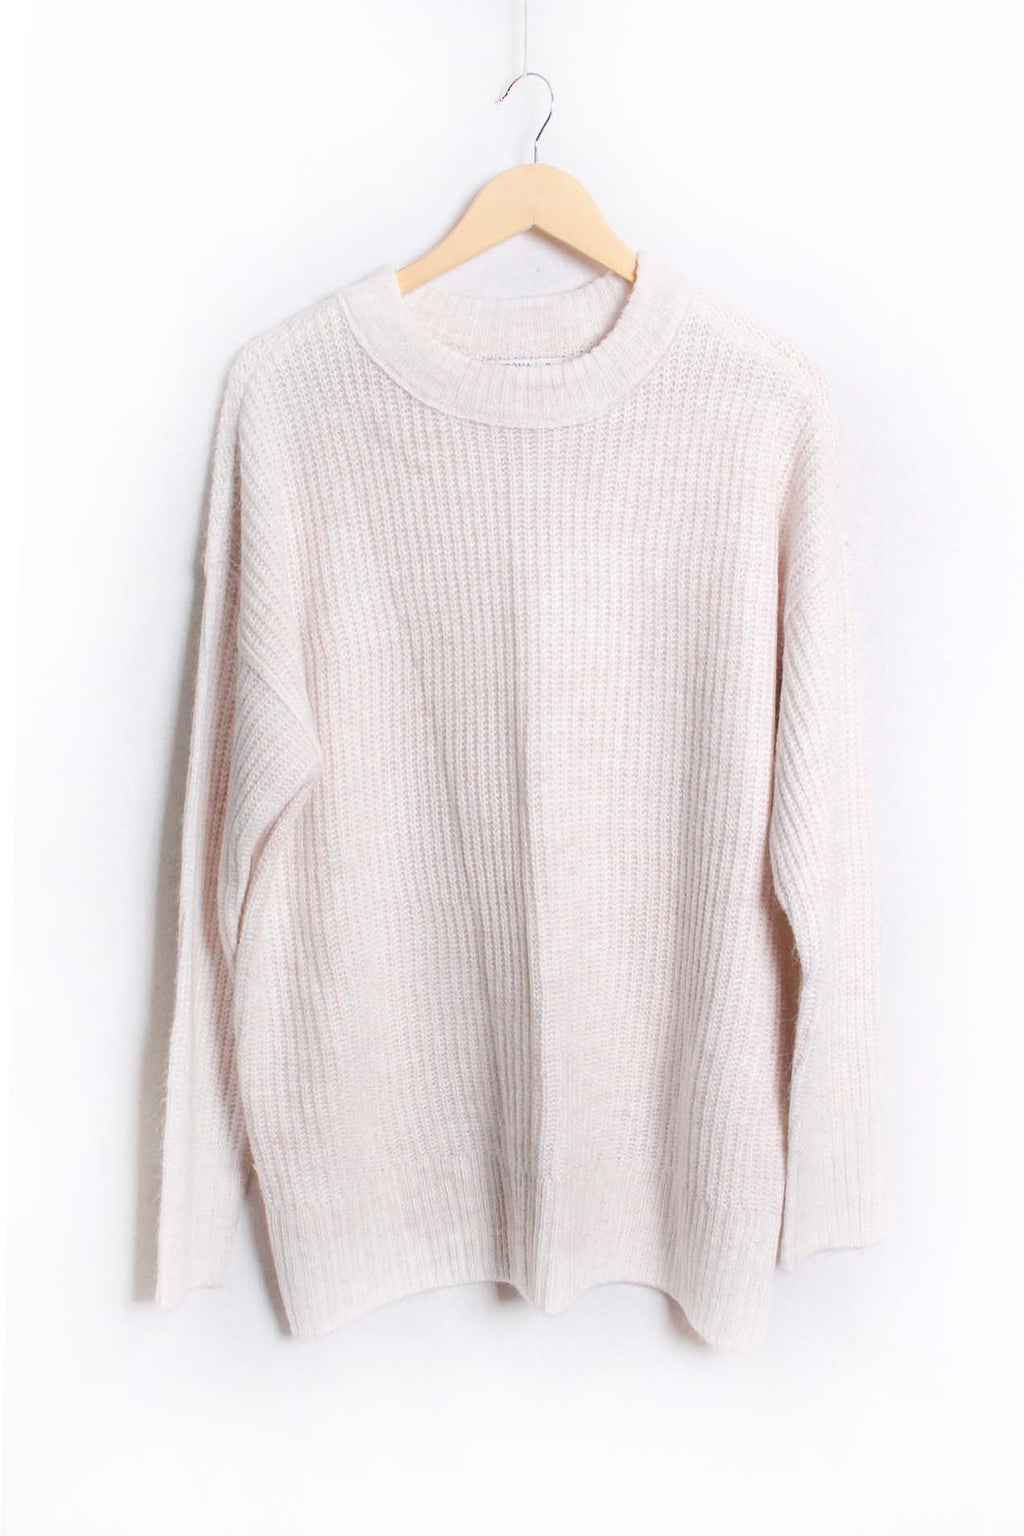 Women's Long Sleeve Round Neck Ribbed Knit Sweater